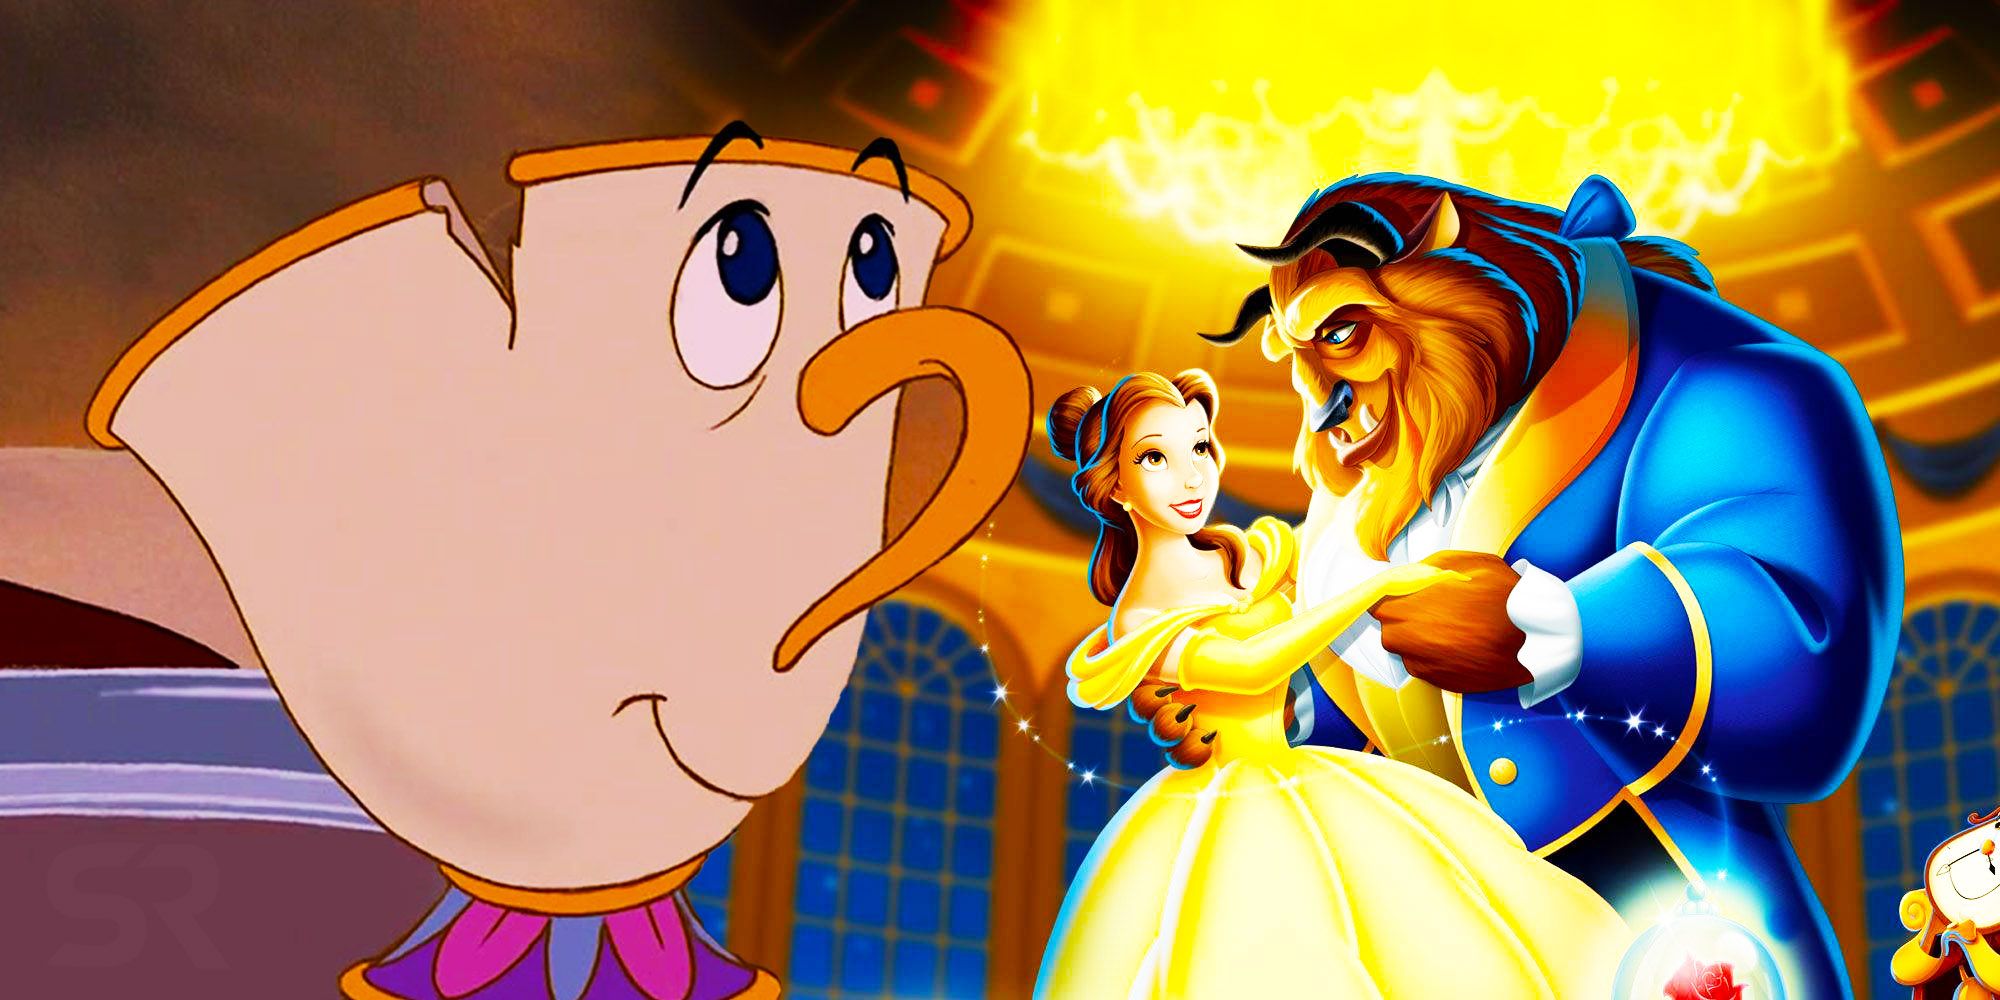 Beauty and the beast chip cut character